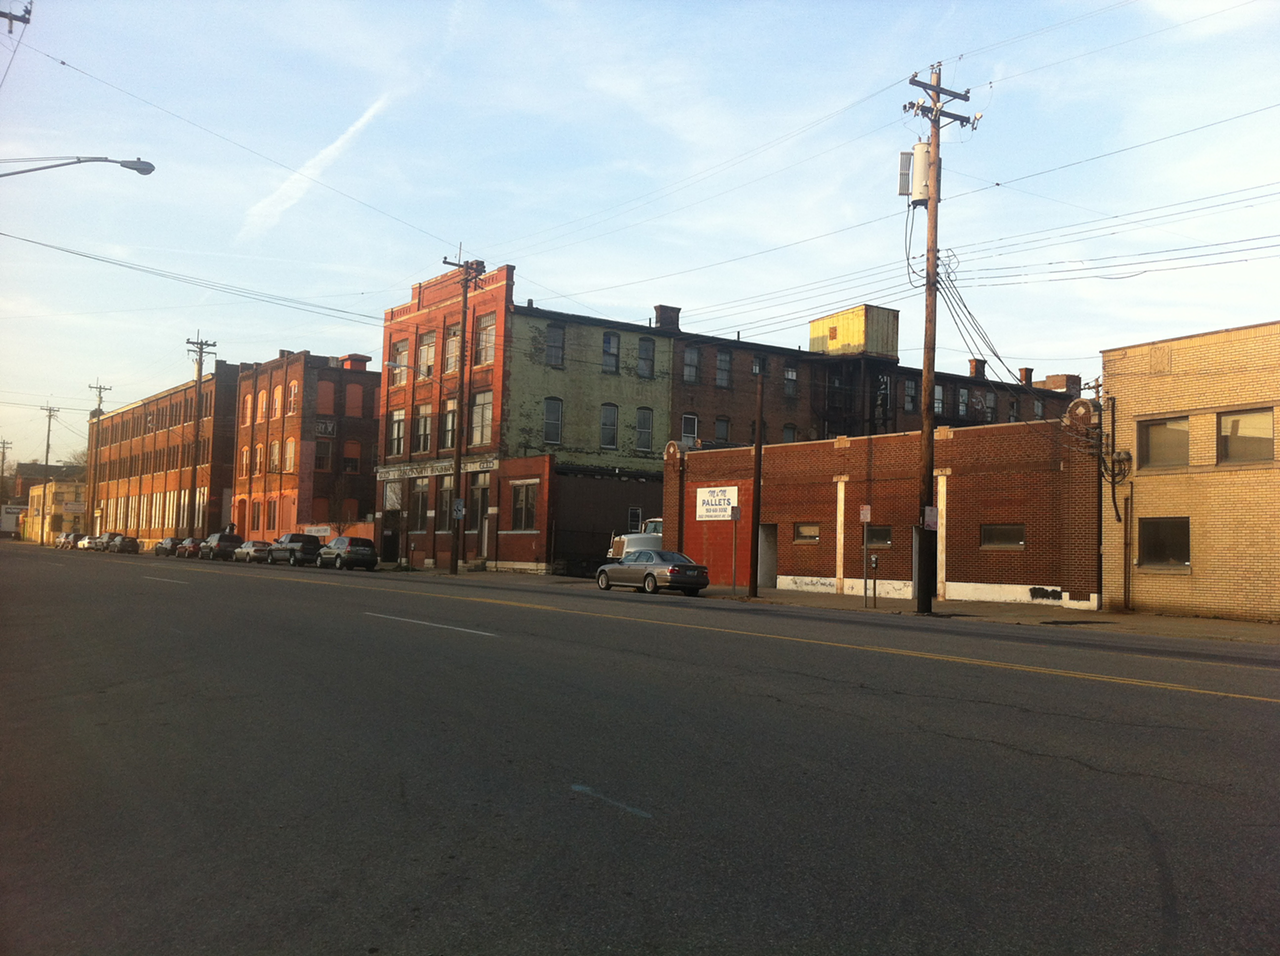 Spring Grove Avenue in Camp Washington. Ultrasuede was located in the single-story red brick building.